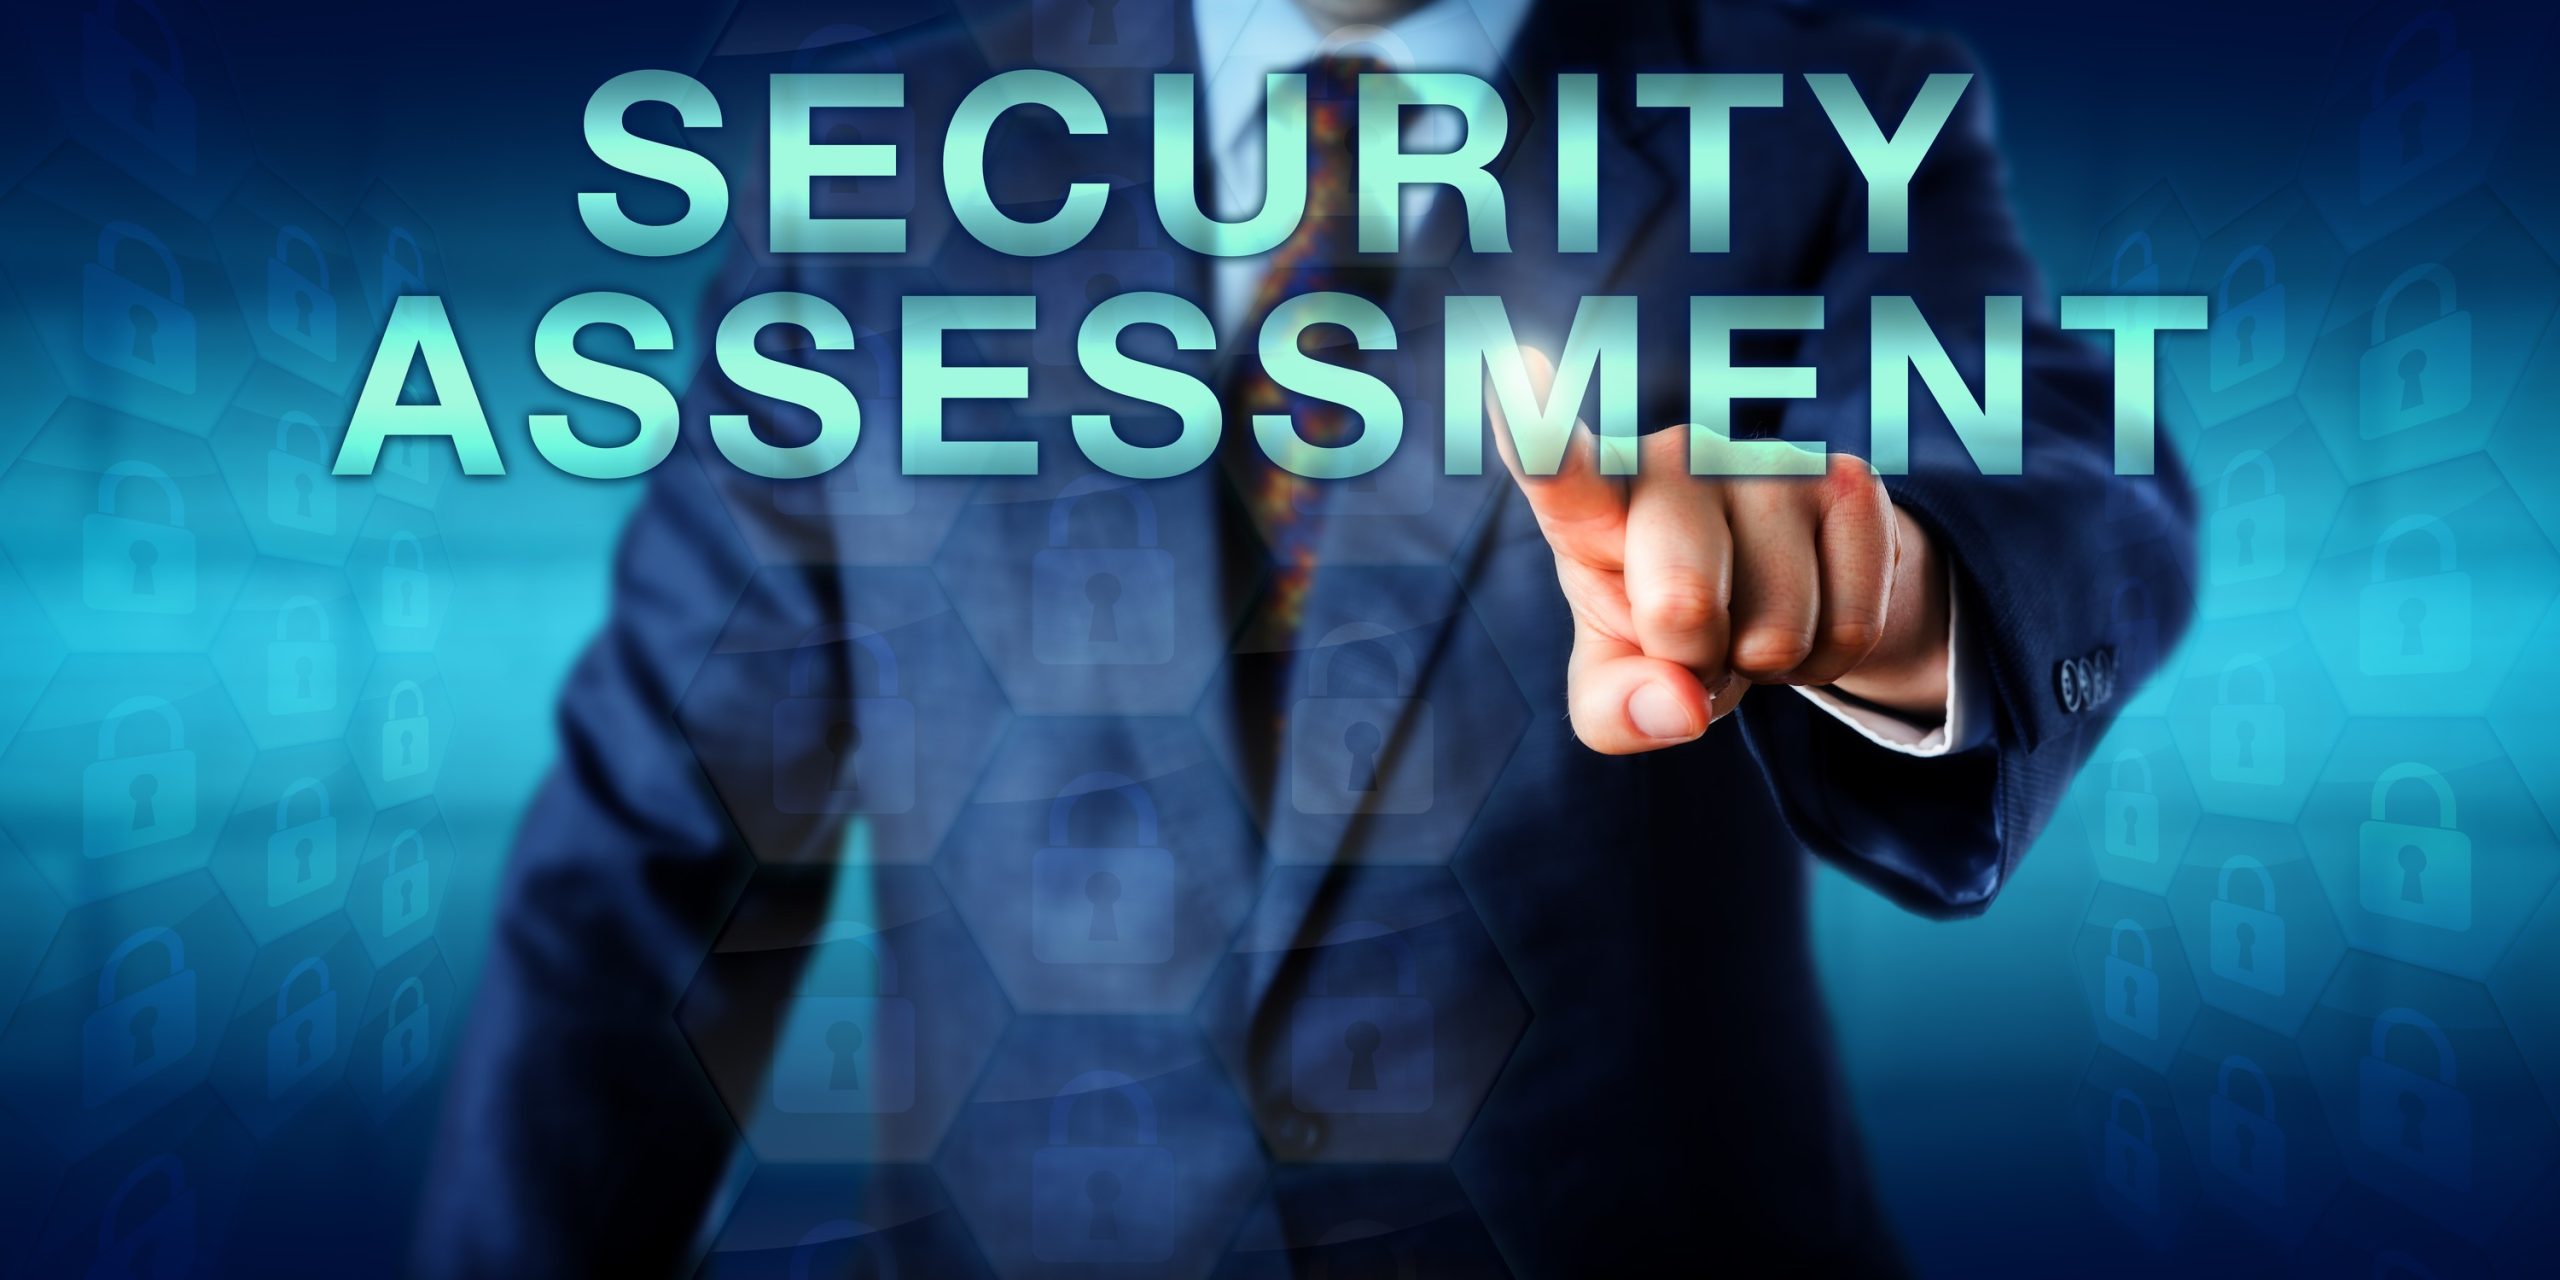 Security Assessment scaled